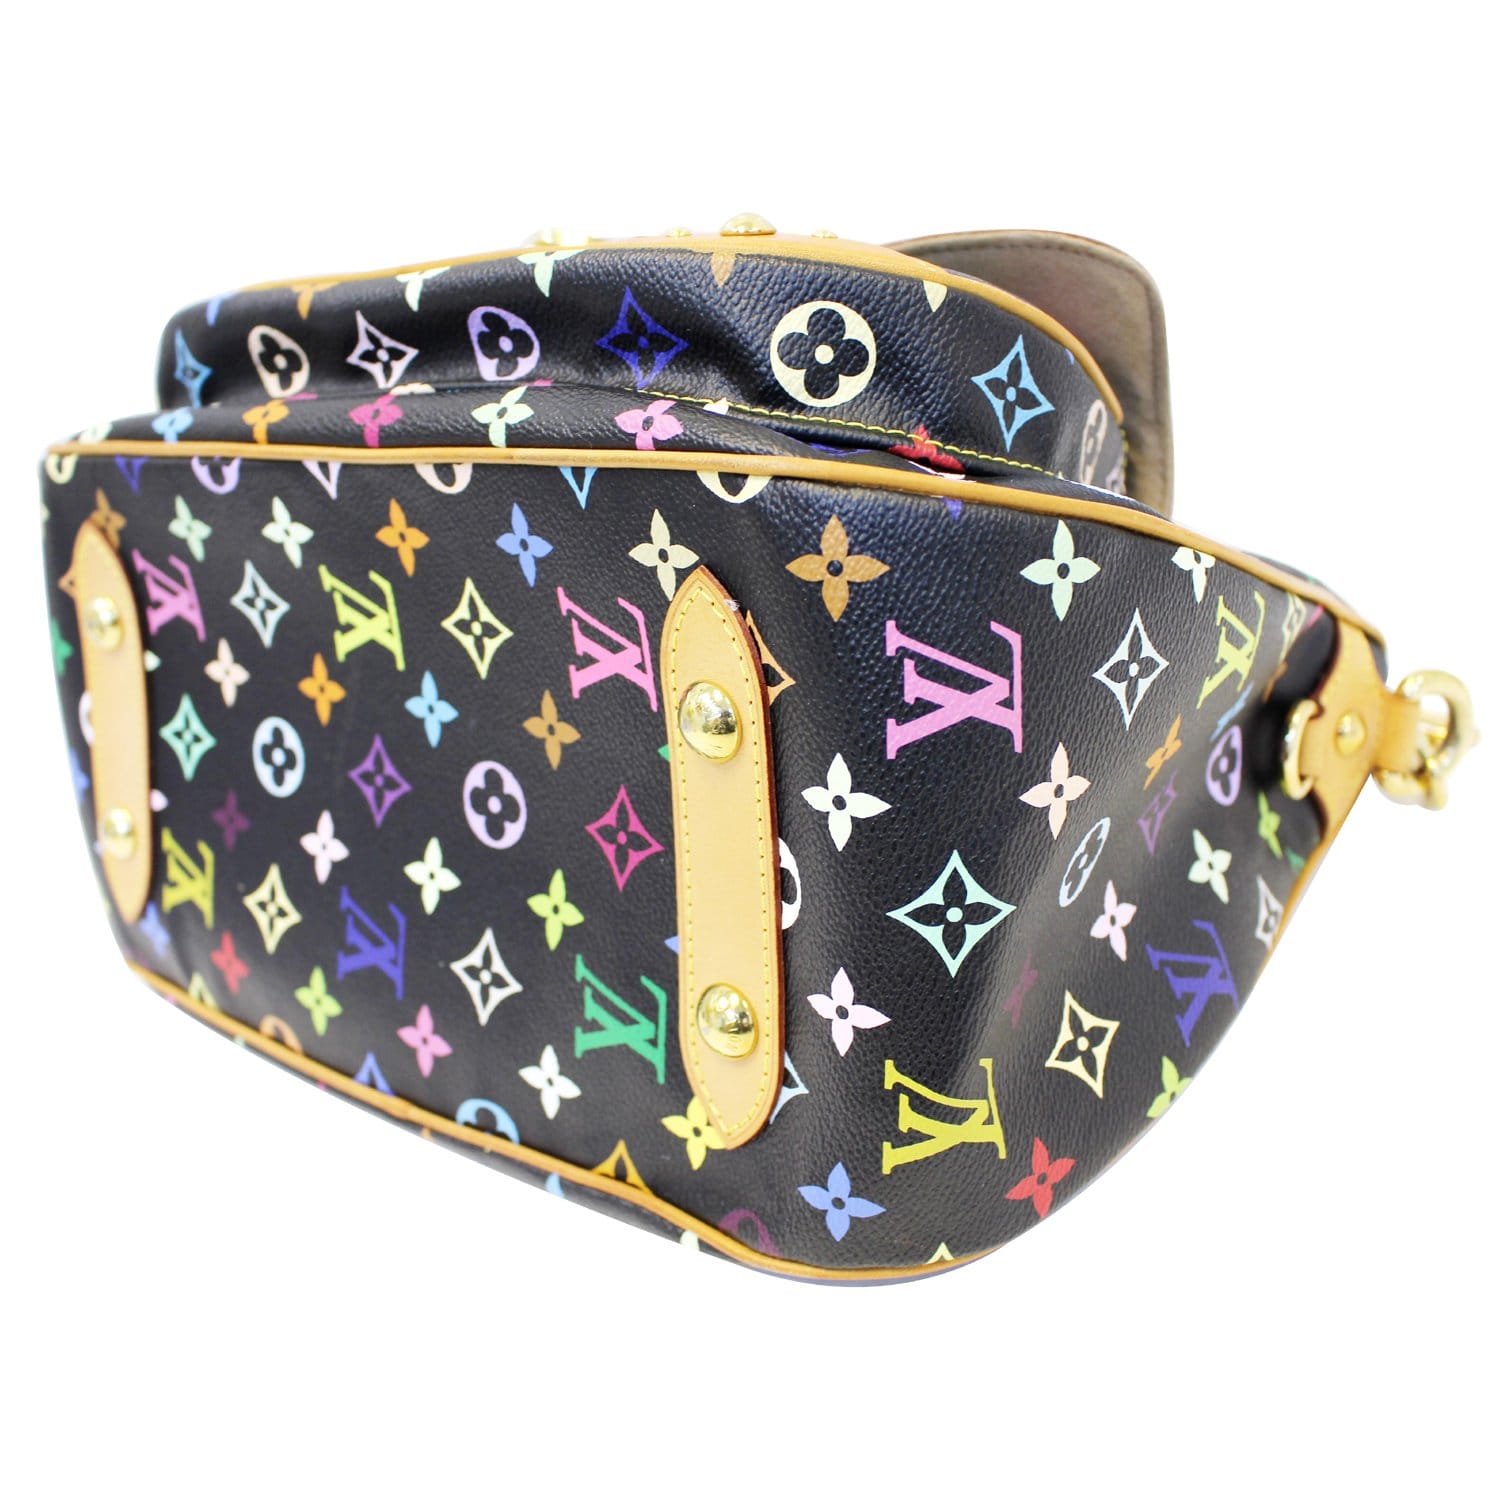 Louis Vuitton Multicolor Rita Review: The Most Underrated Bag from